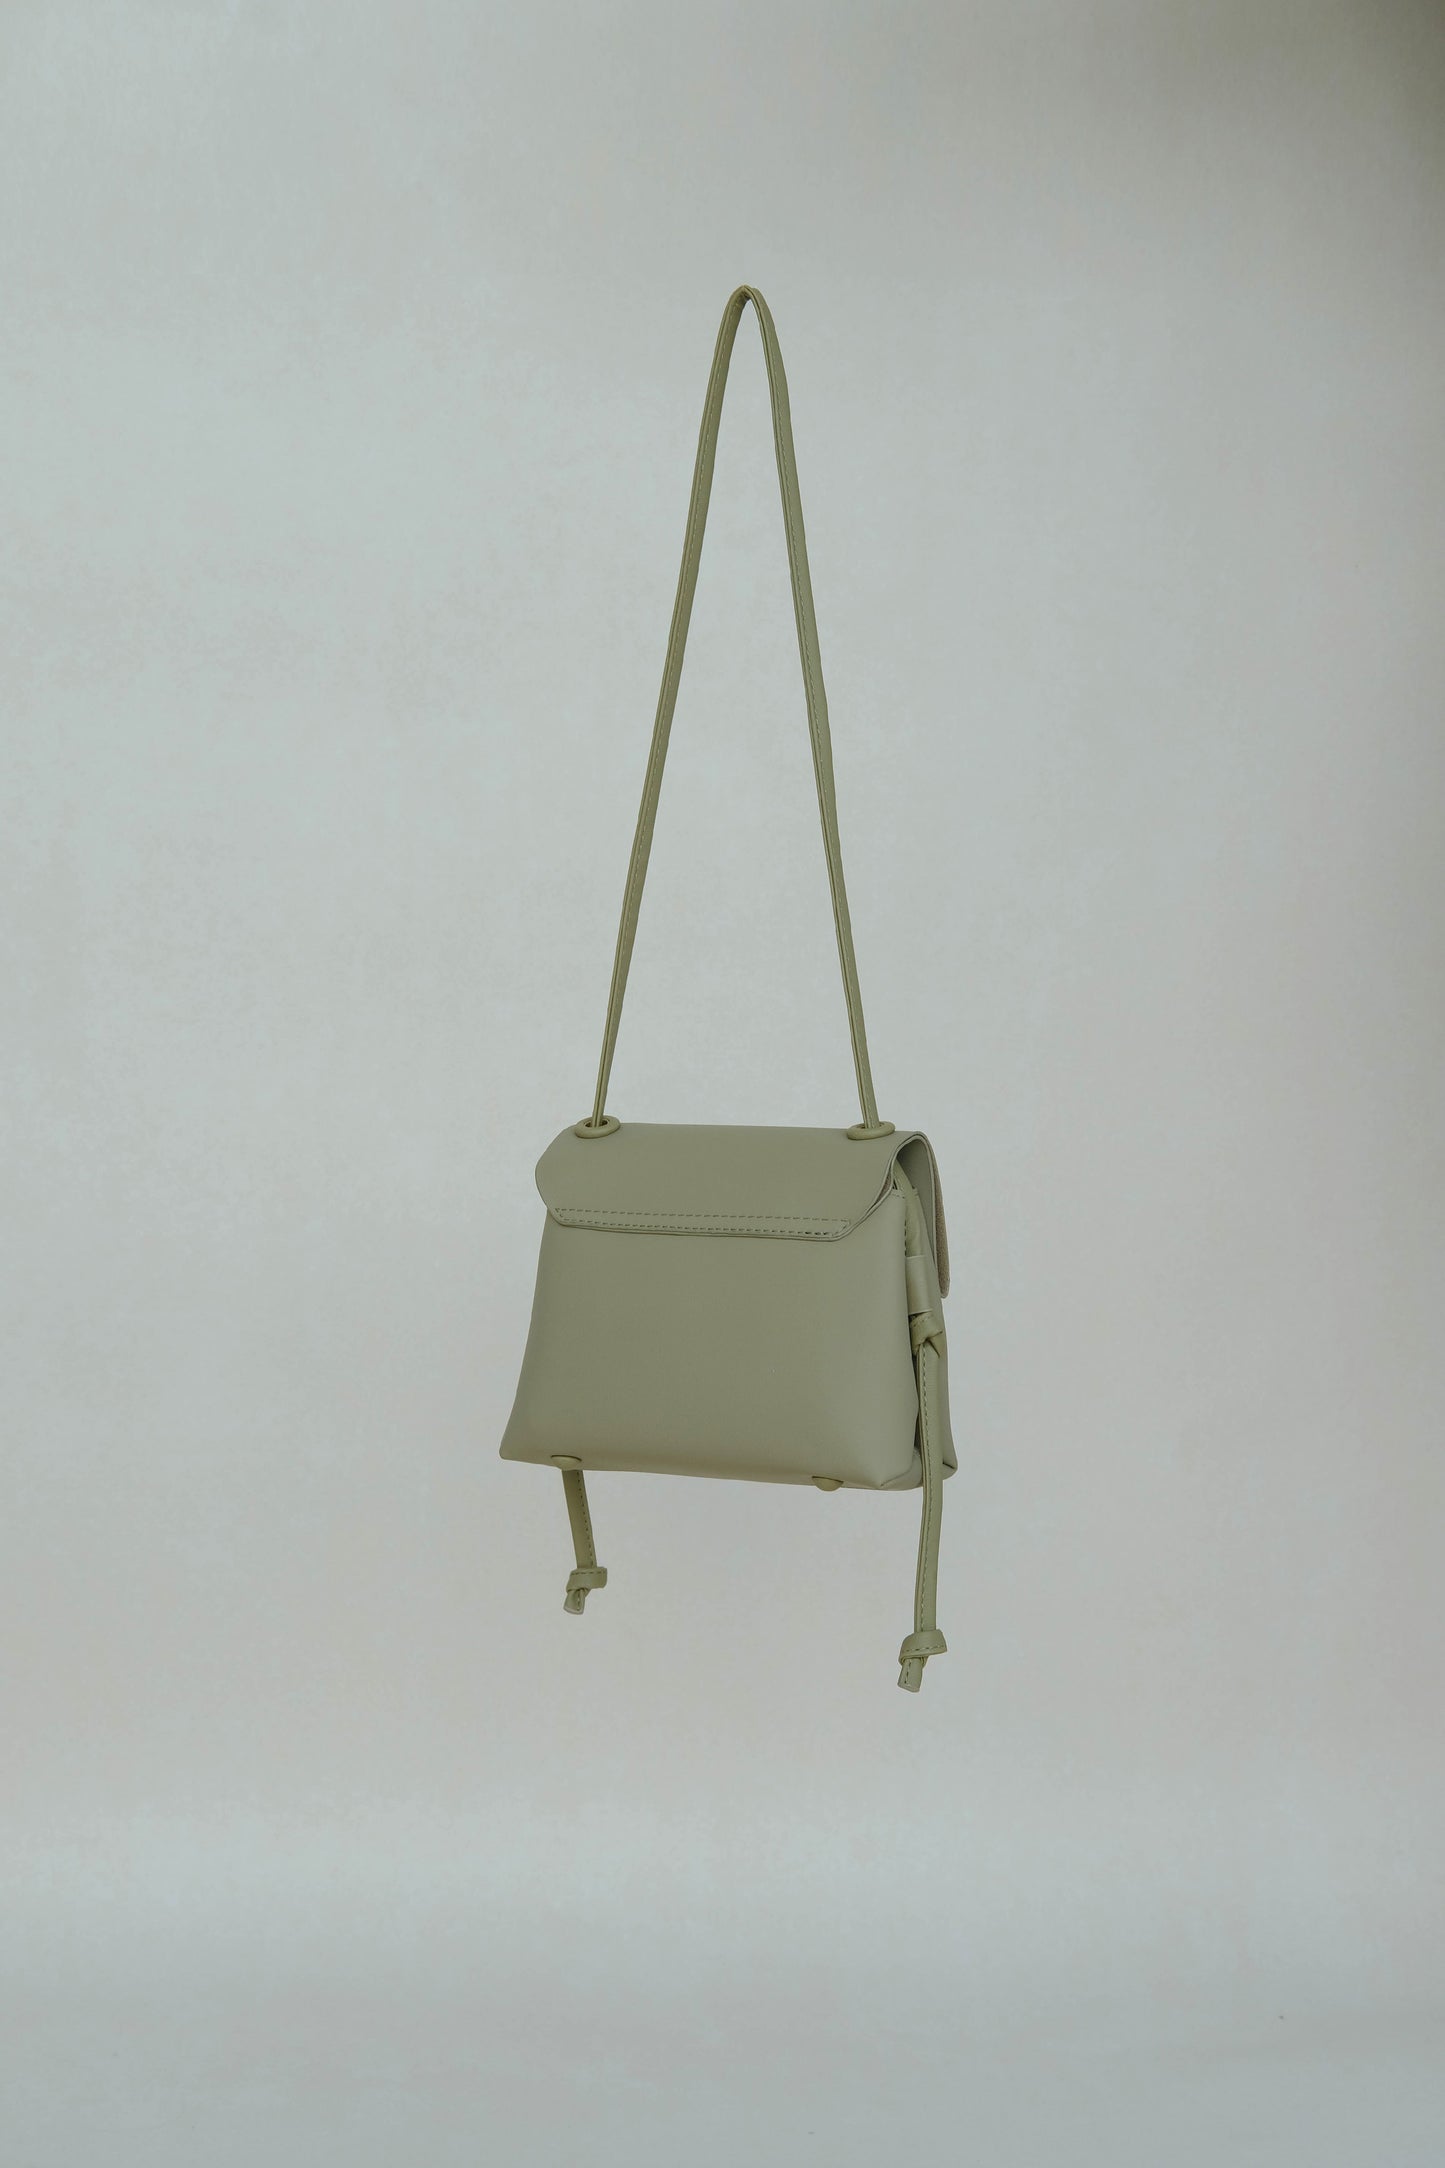 French one-shoulder cross-body vintage small square bag in light green